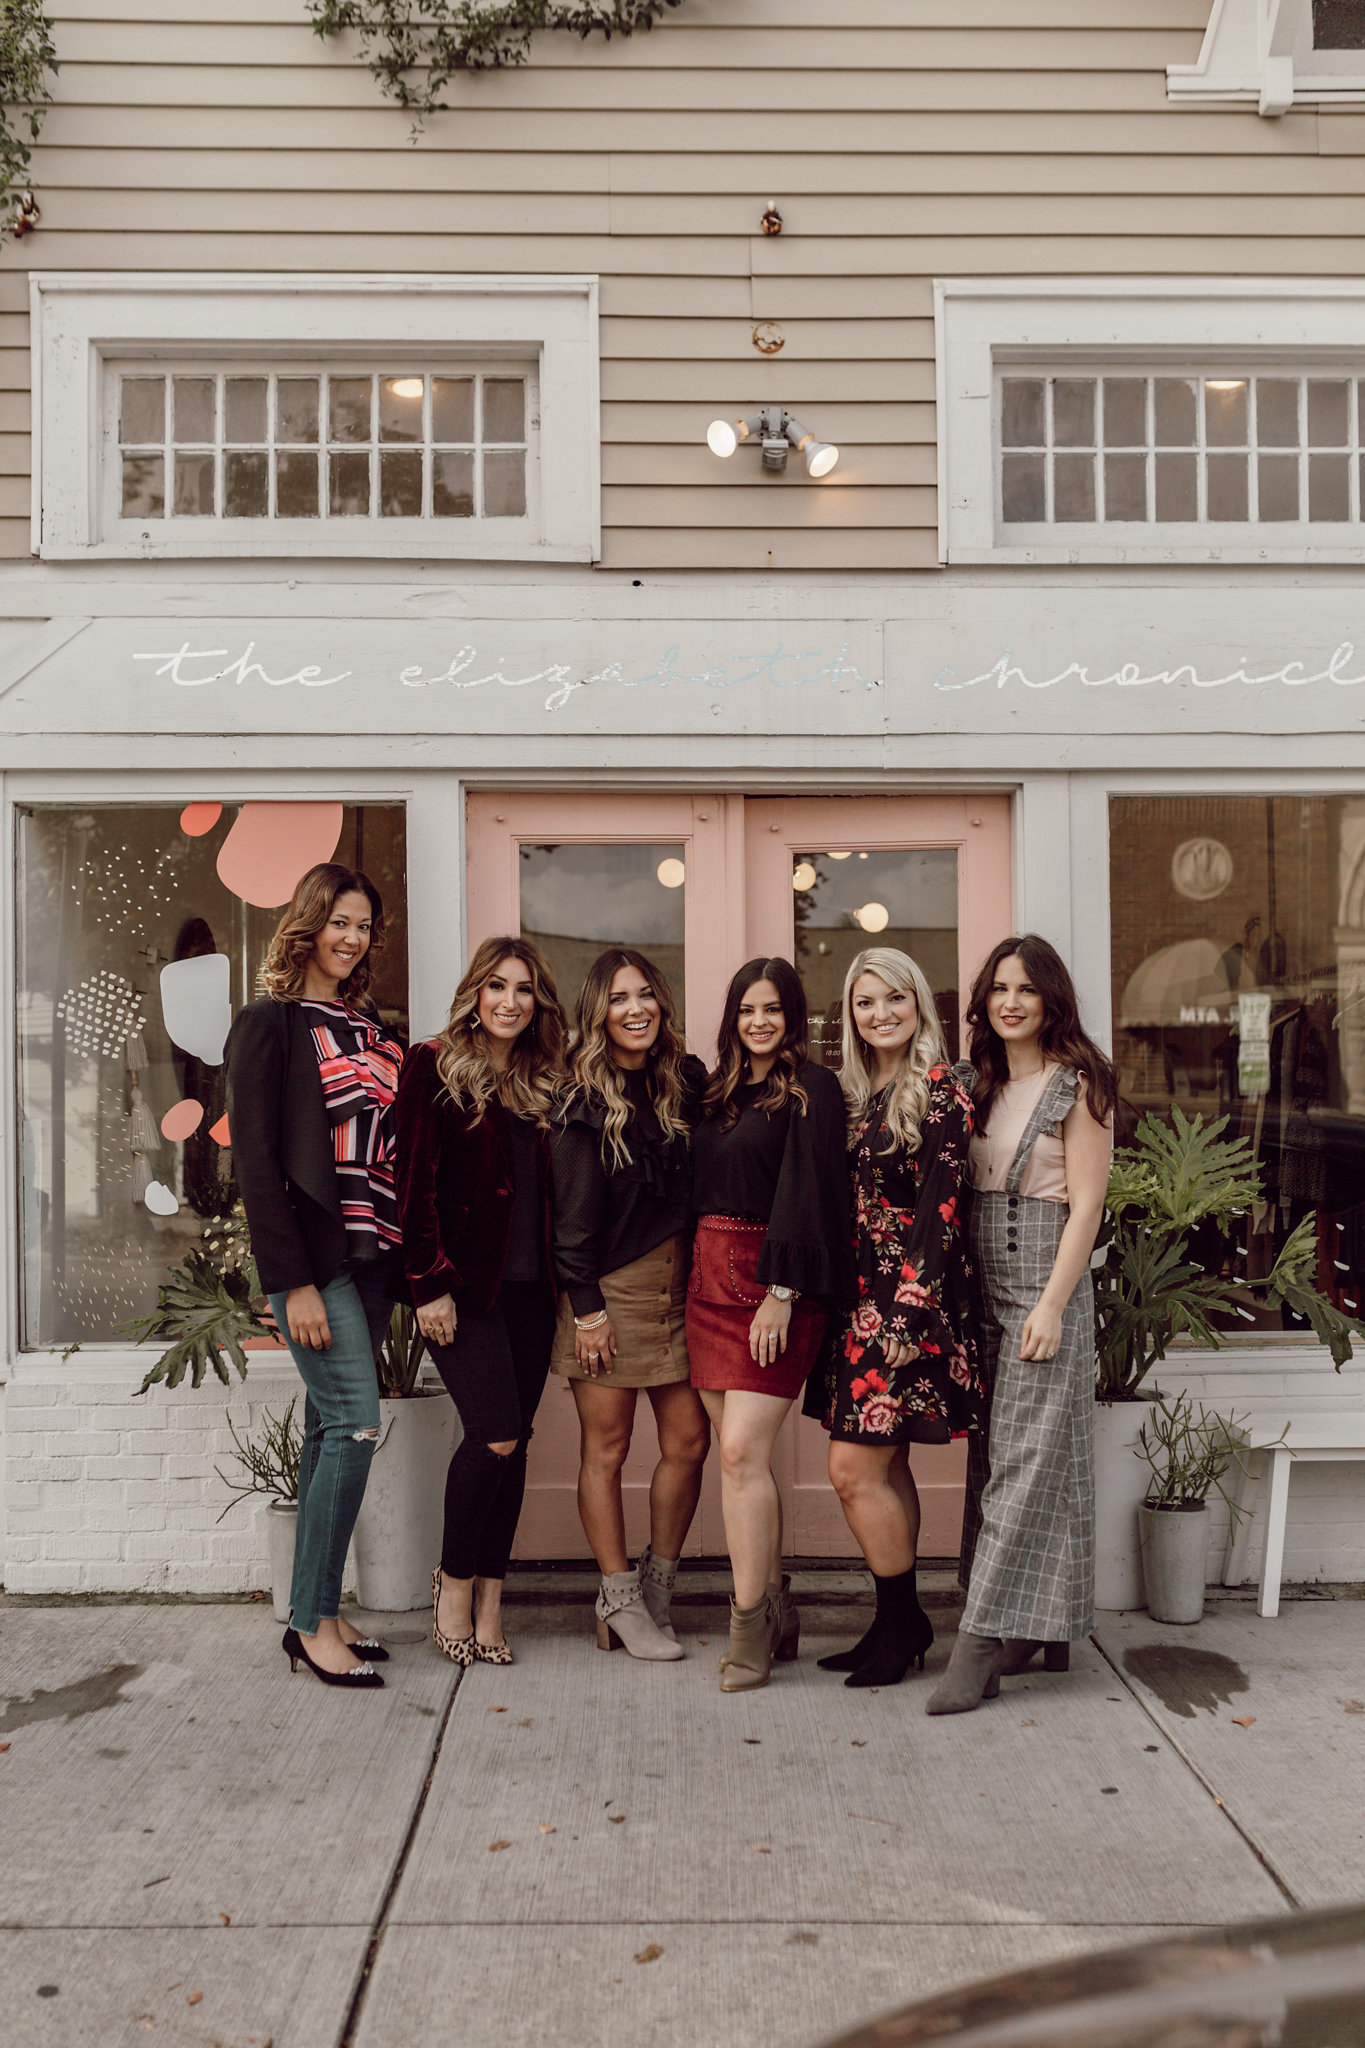 COMMUNITY OF BLOGGERS CONNECTING TO INSPIRE AND ENCOURAGE ONE ANOTHER. READ MORE TO FIND OUT THE DETAILS ABOUT STYLE COLLECTIVE.